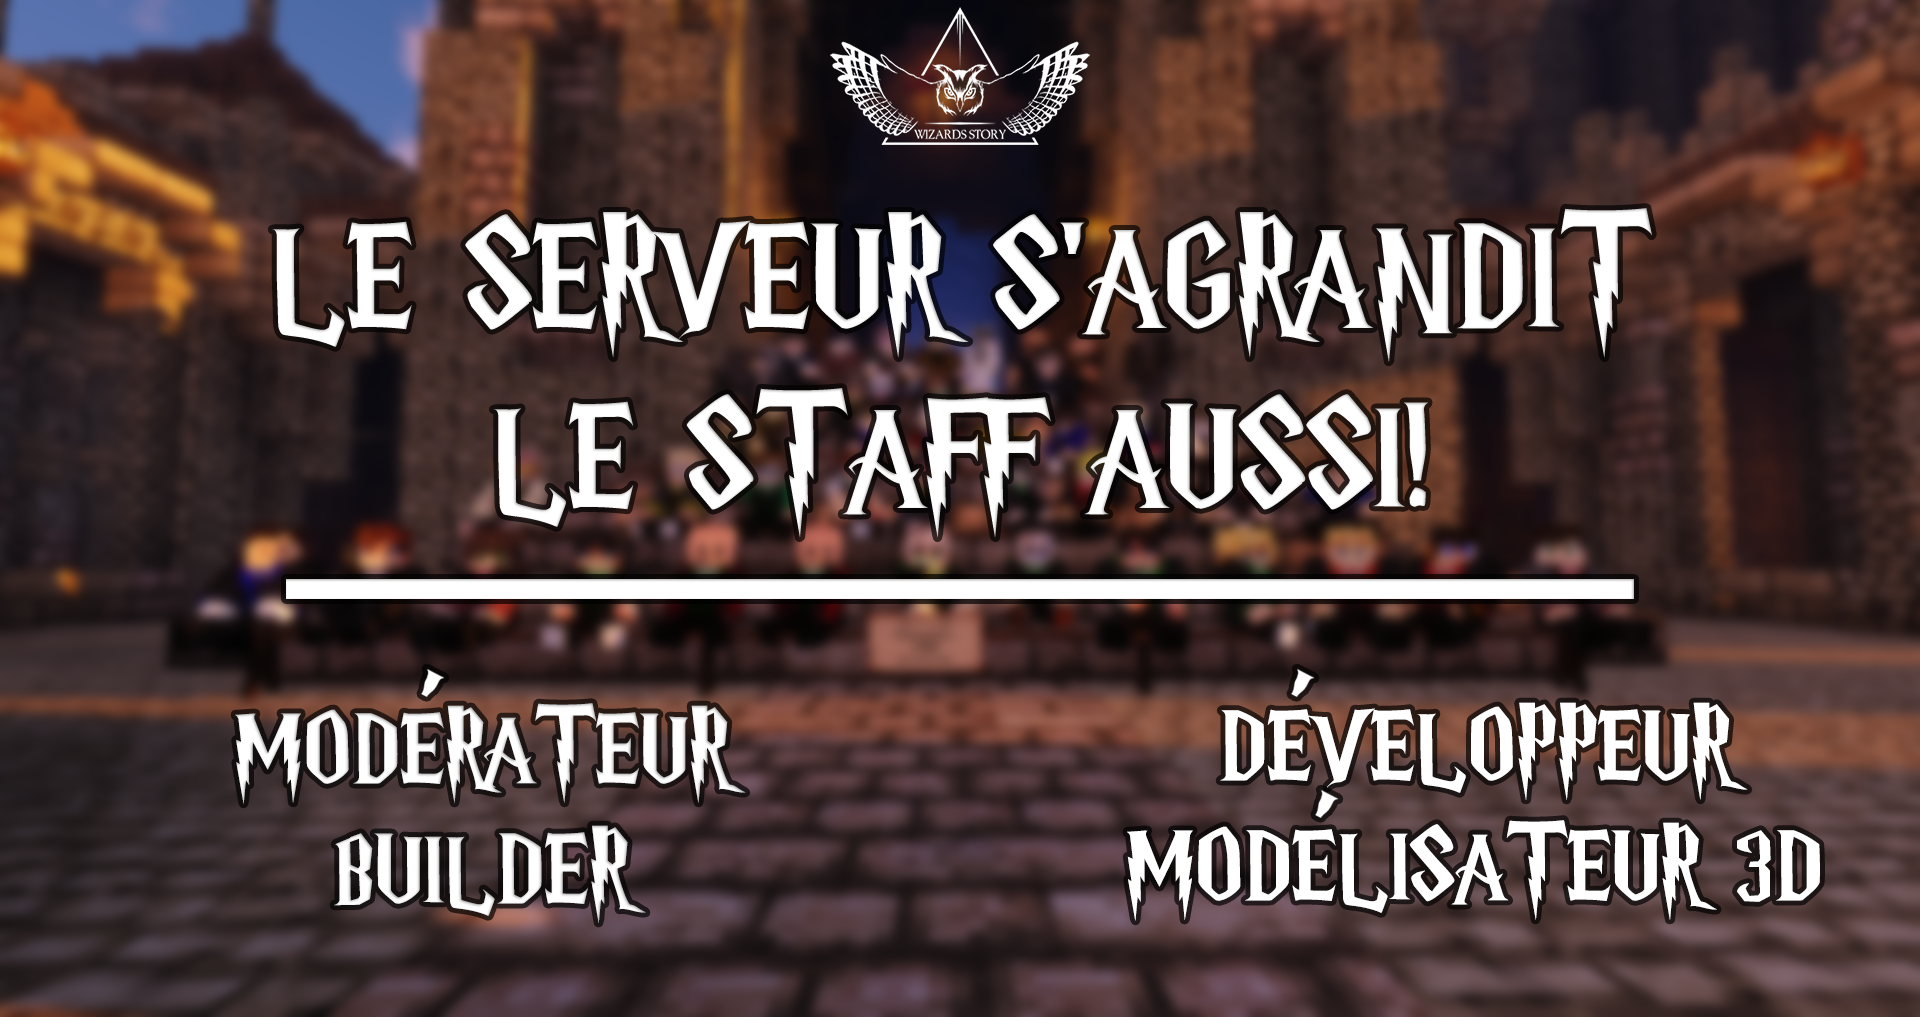 Recrutement - WS (1).png